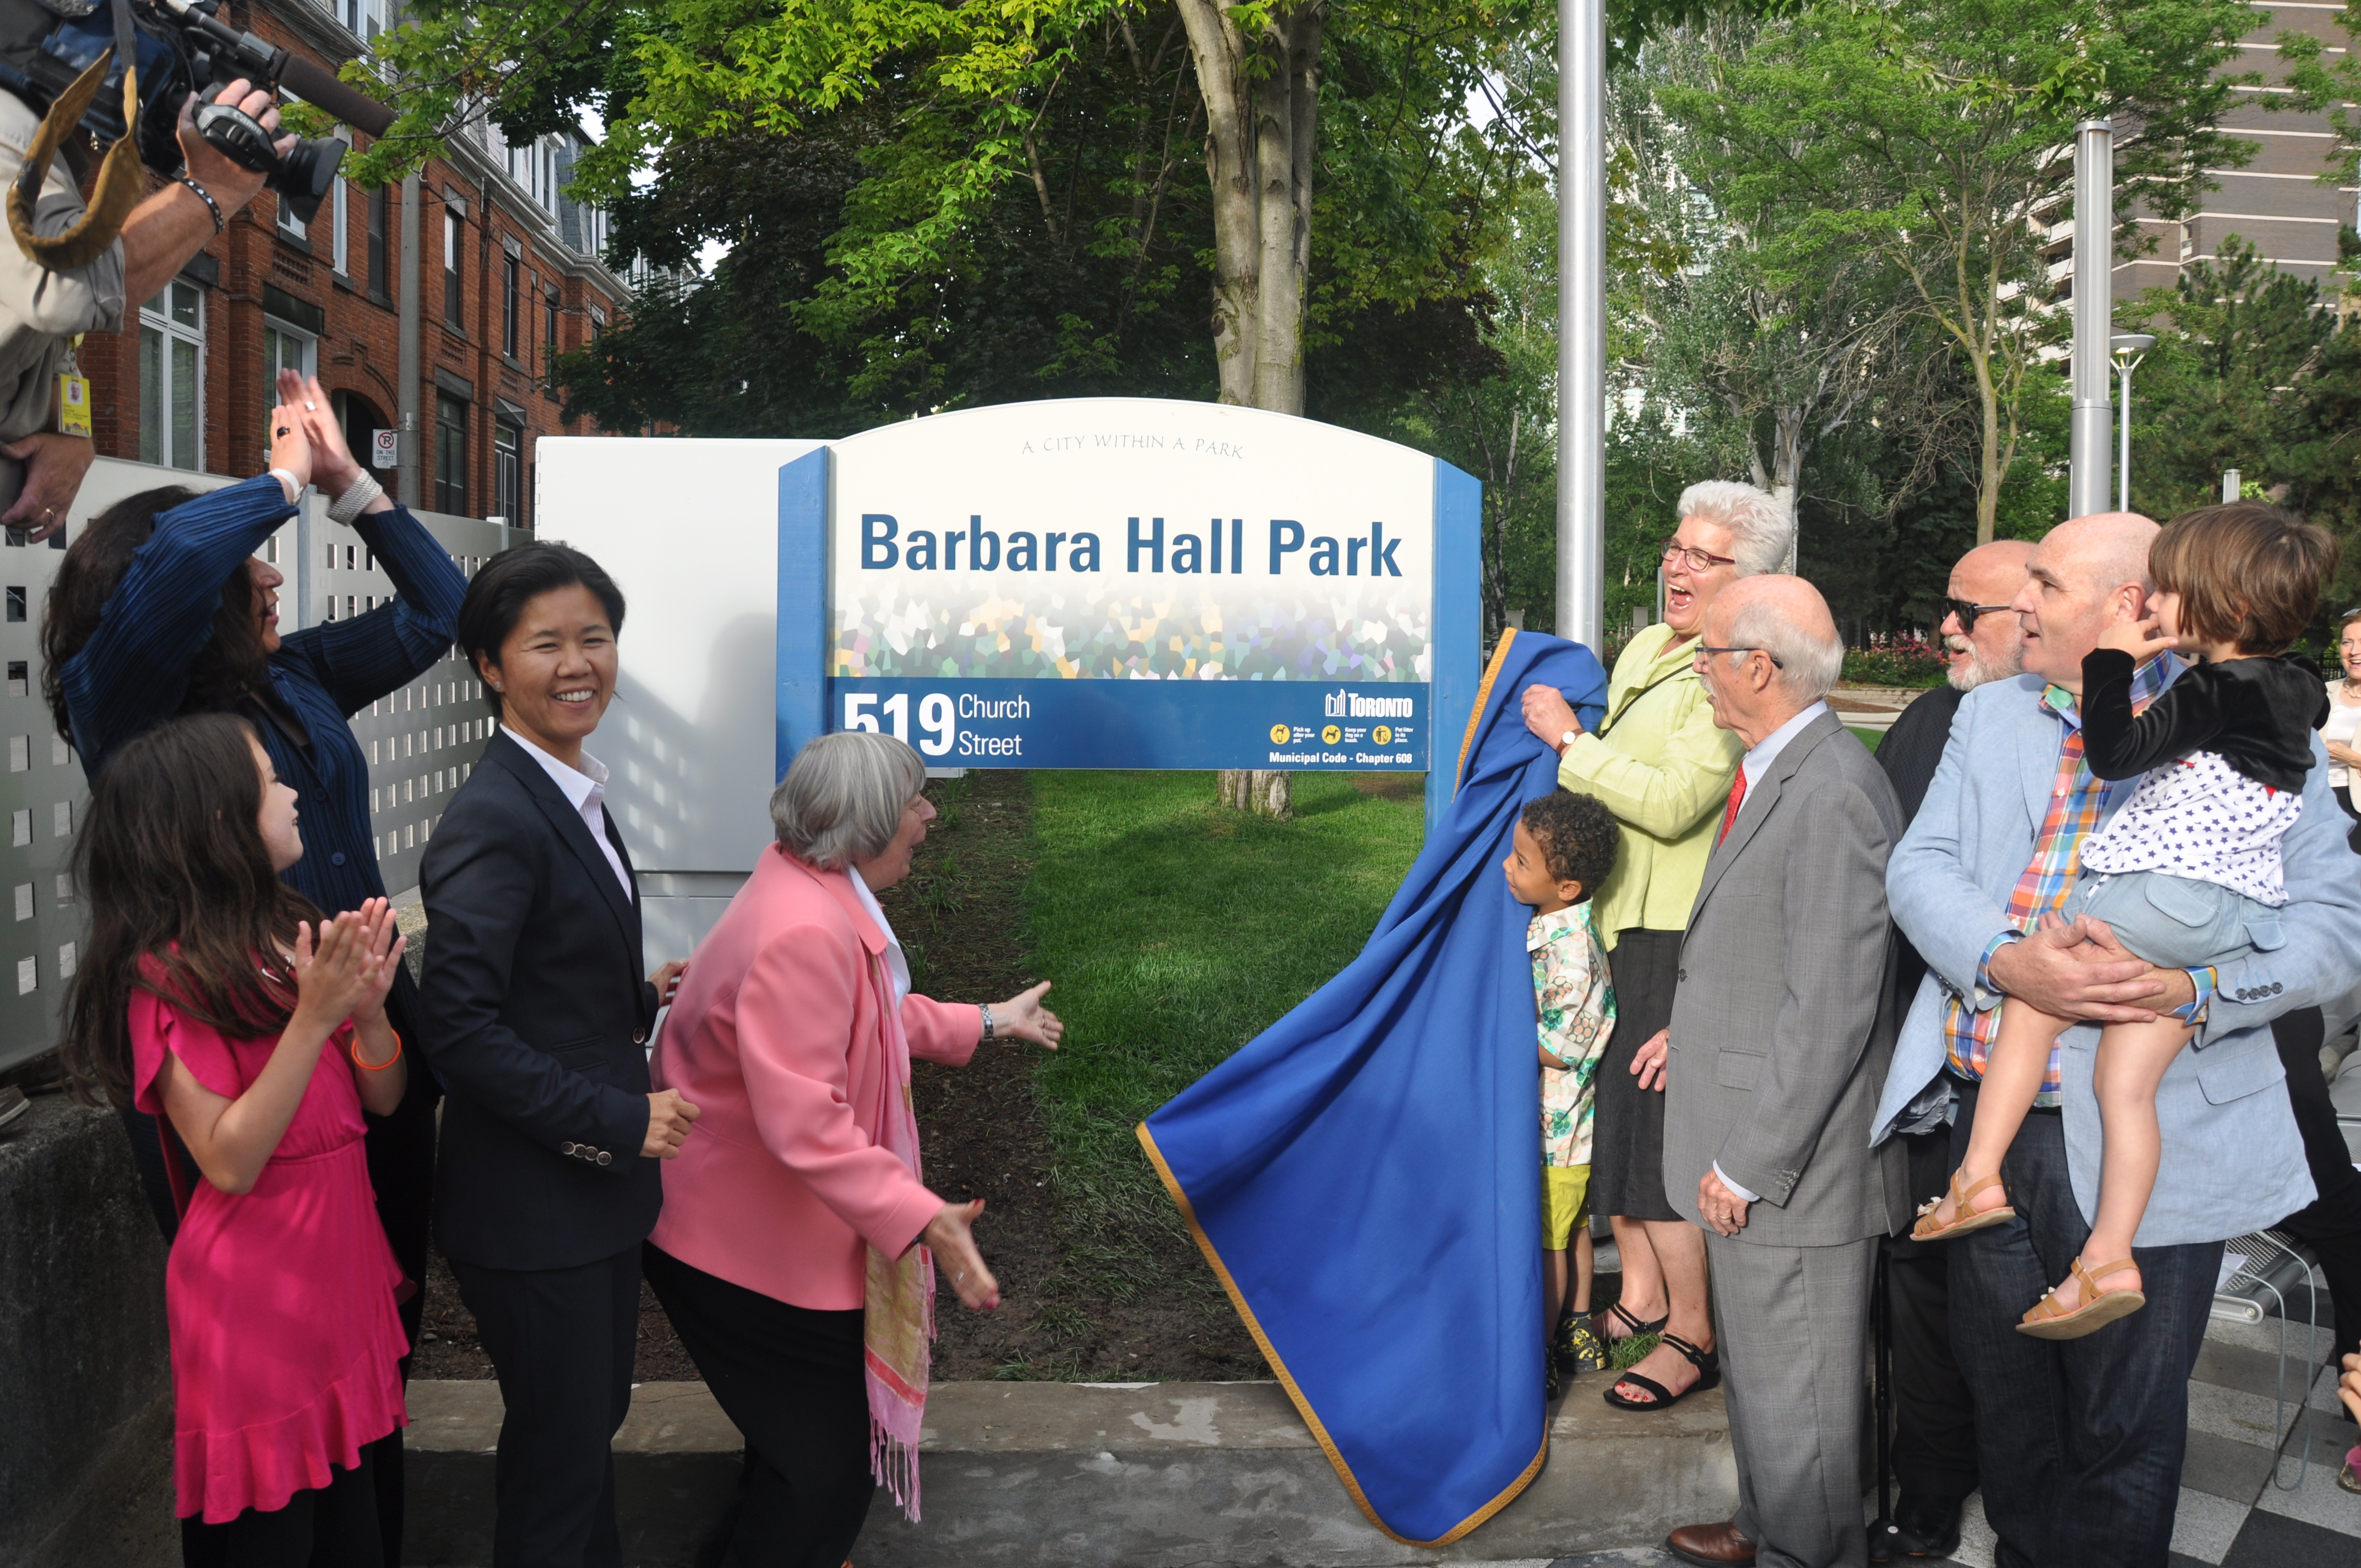 Chief Commissioner Barbara Hall unveils the new sign at Barbara Hall Park. Her Husband Max and City Counsellor Kristen Wong Tam stand in the small crowd nearby.